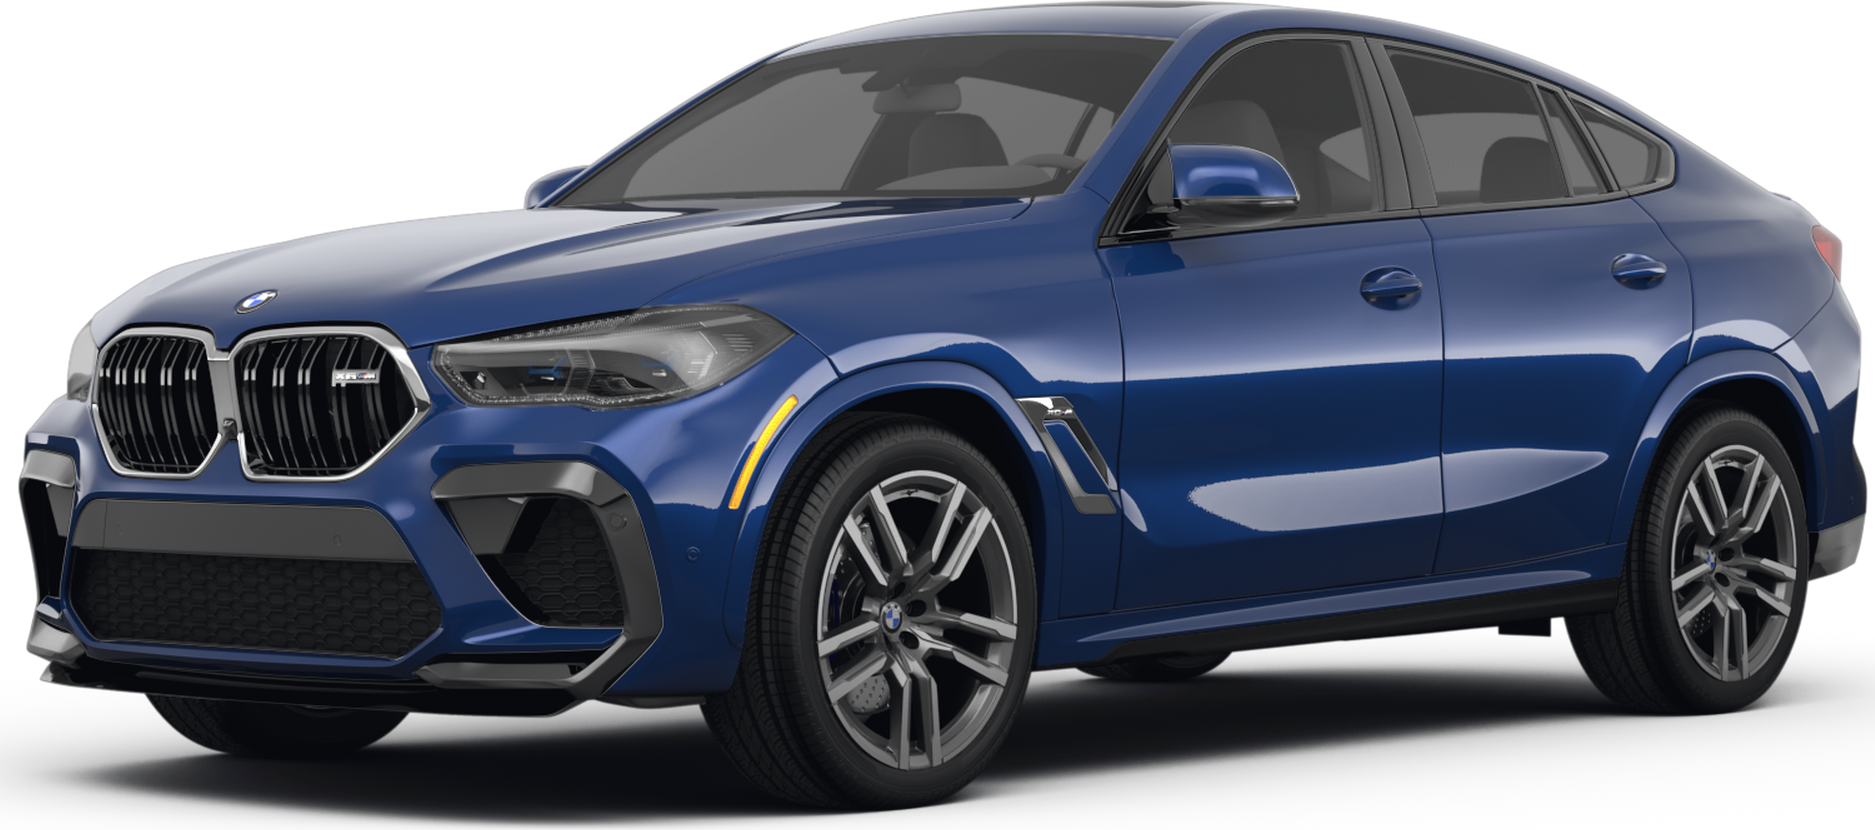 2023 BMW X6 Prices, Reviews, and Photos - MotorTrend